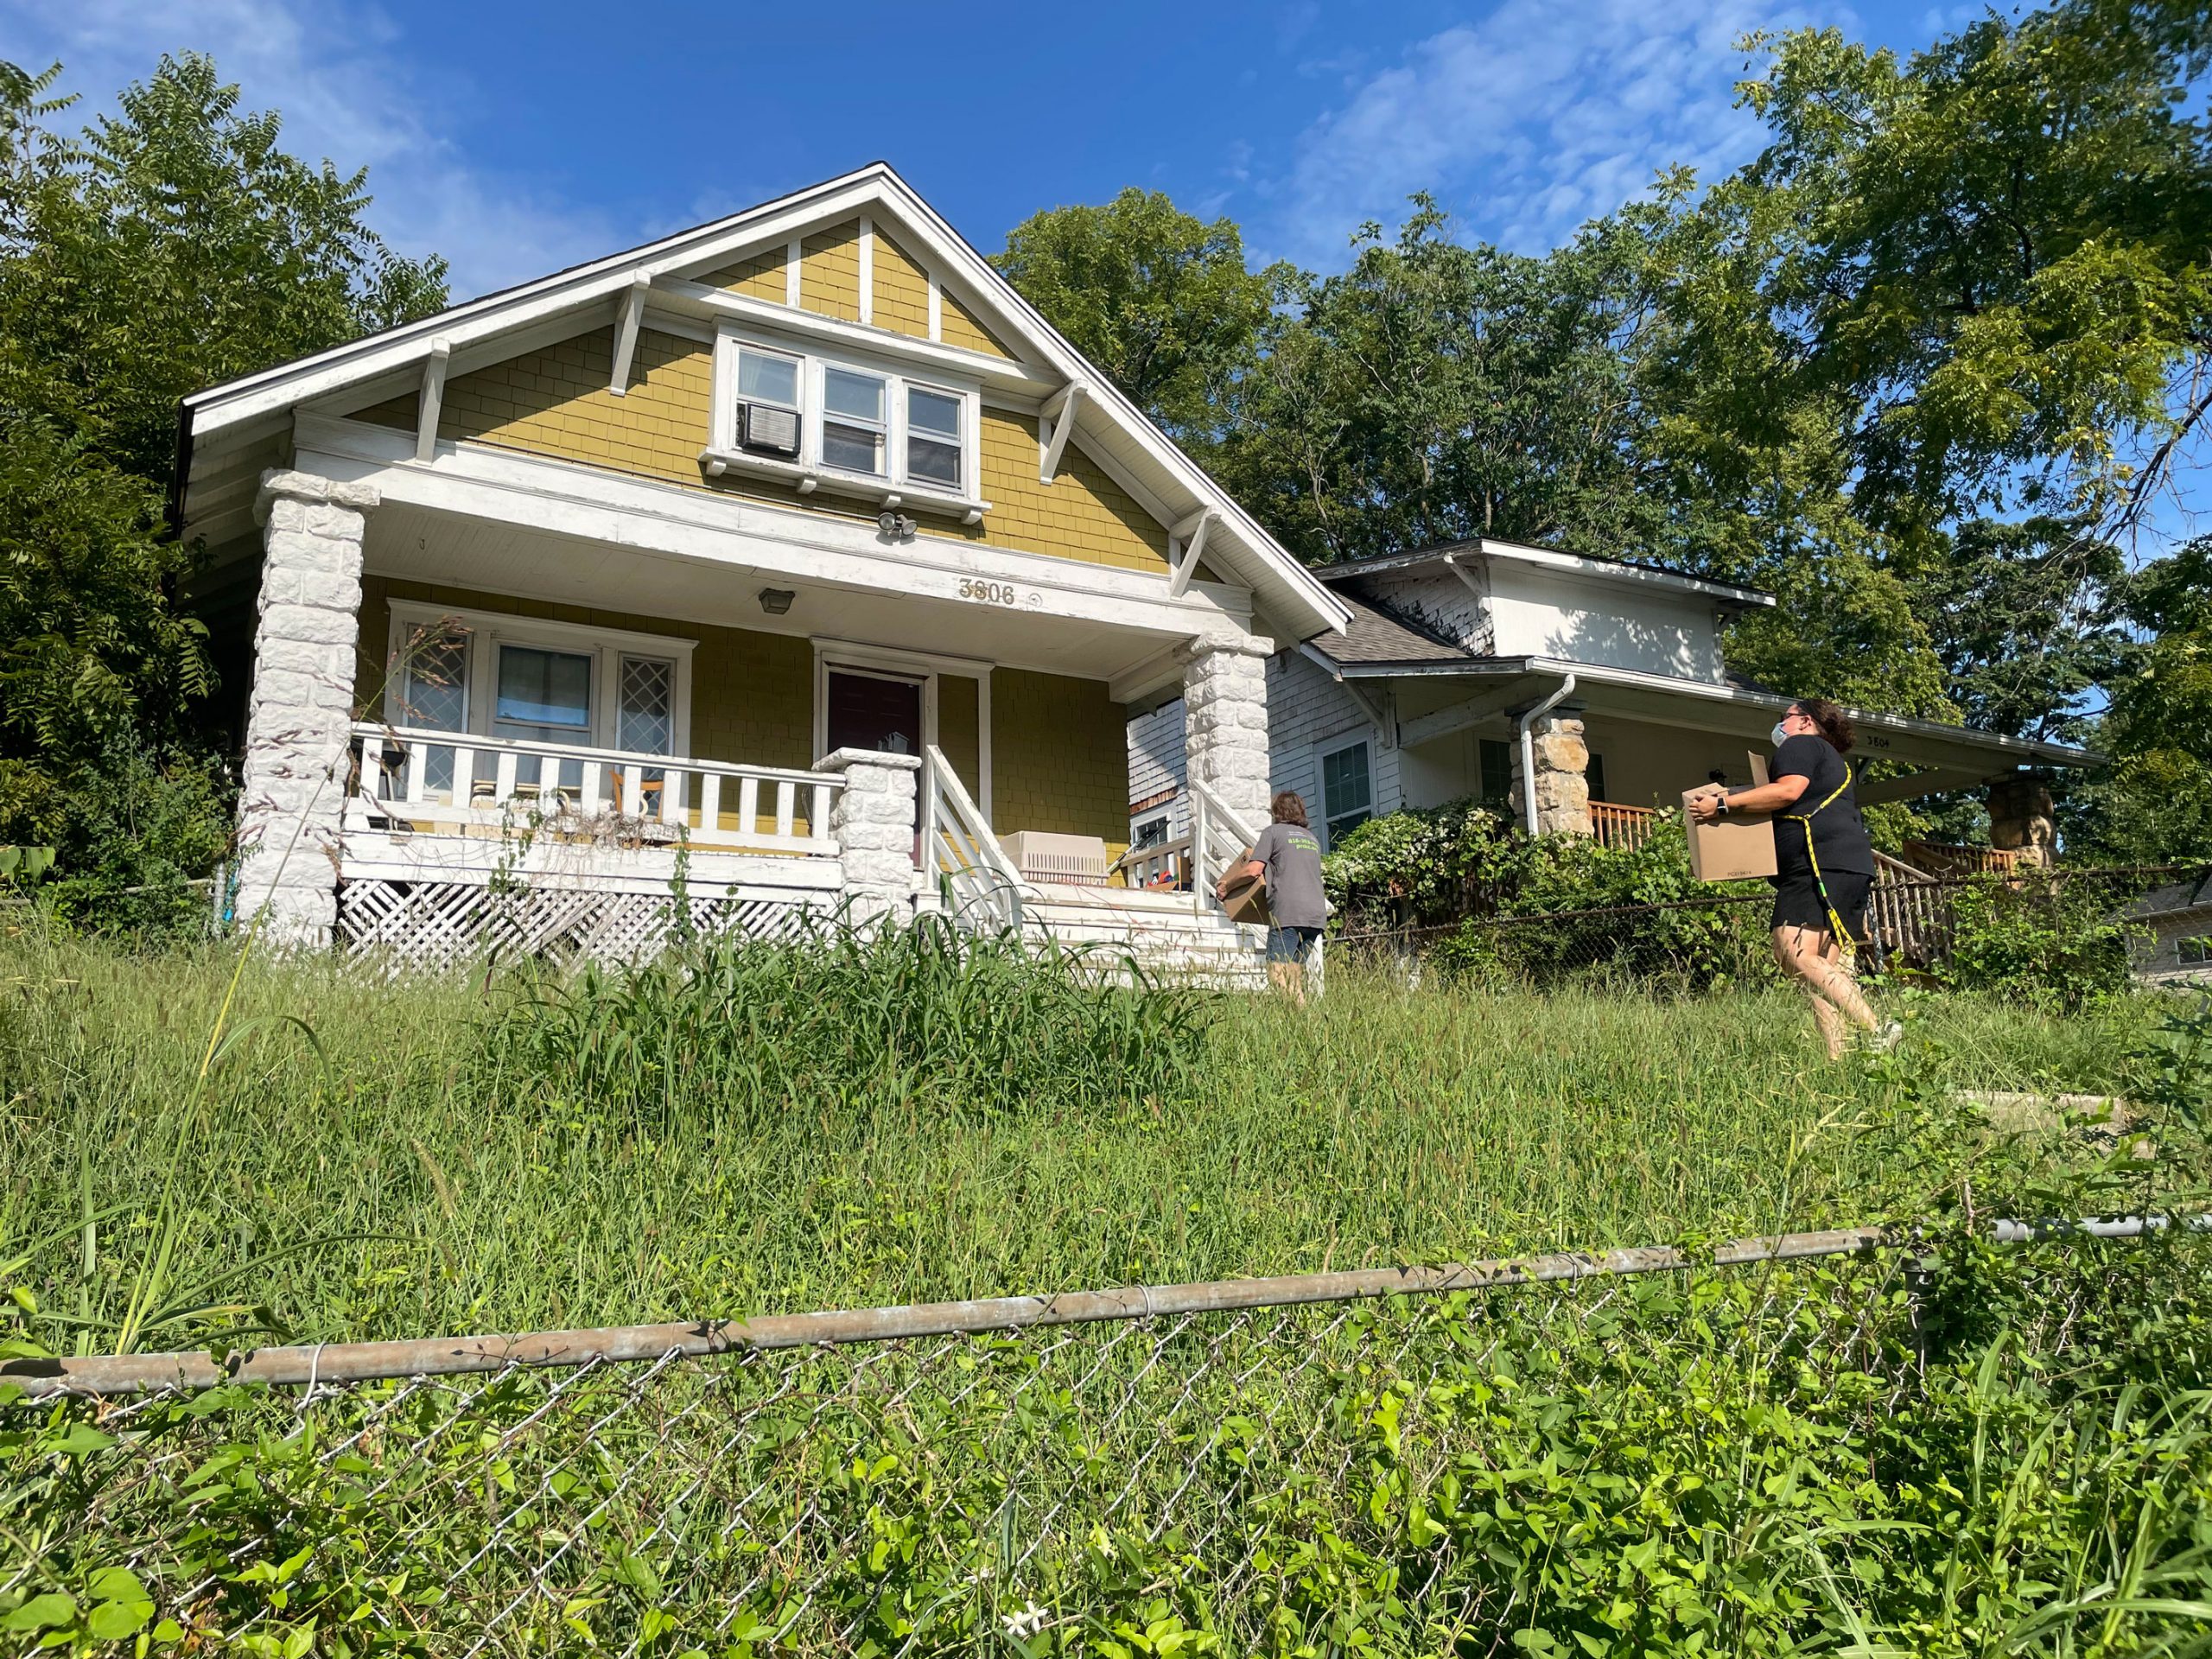 Two people walk up the sidewalk of a house with an overgrown lawn